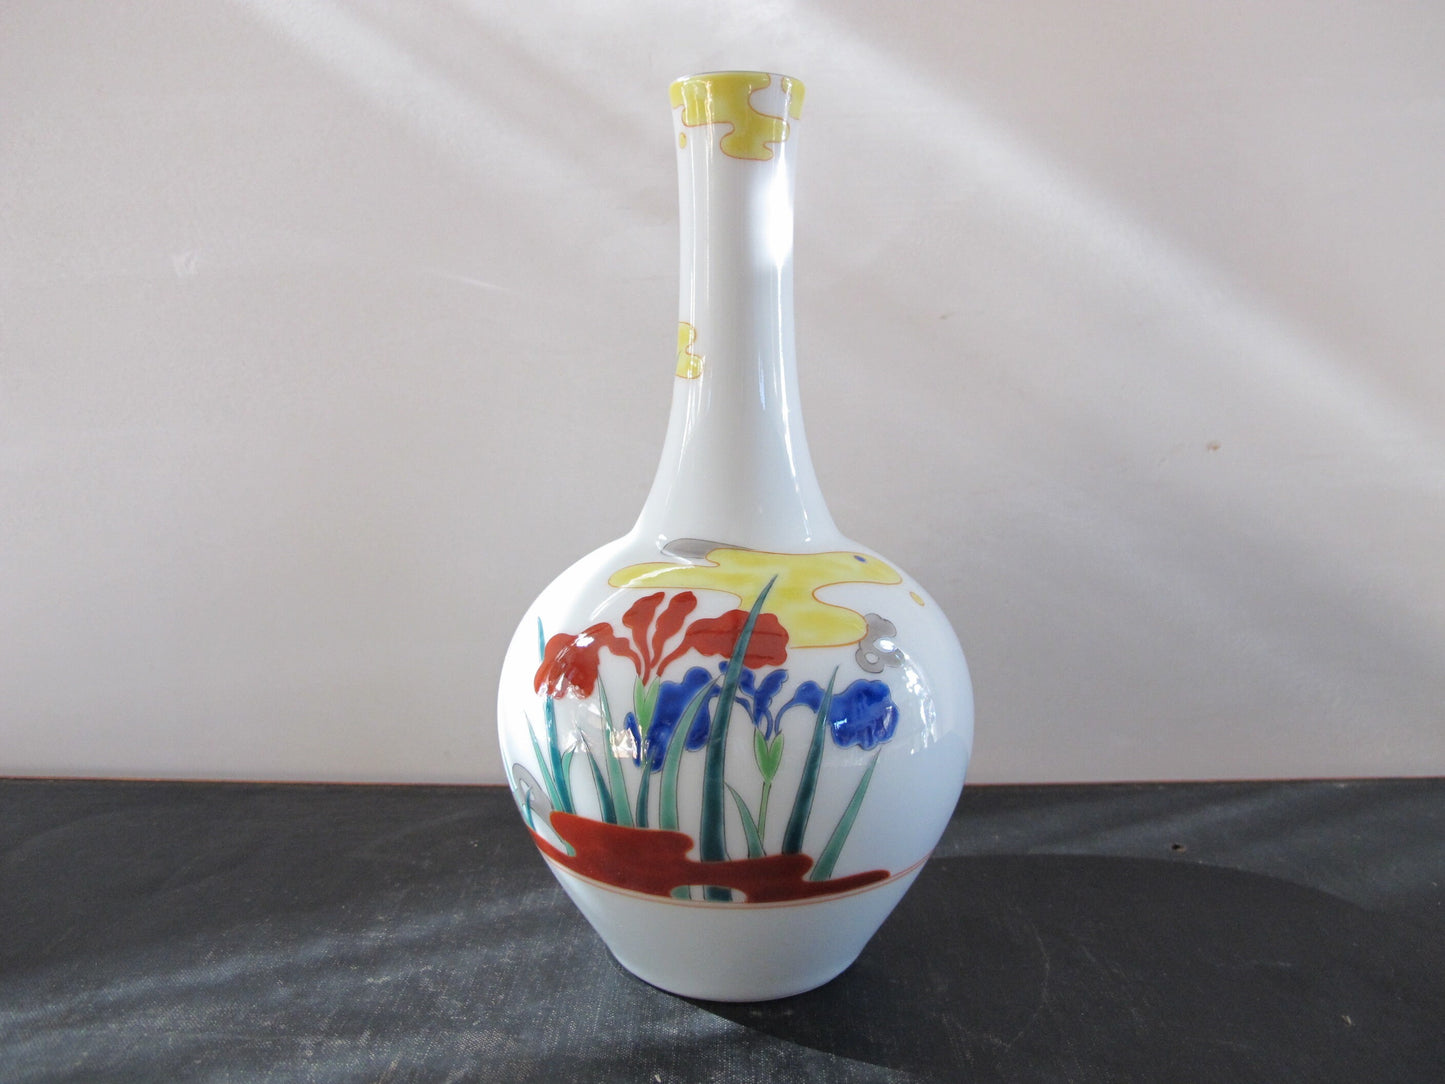 Vase Japanese Signed Marked Mount Fuji Iris Blue and Red with Yellow Cloud Form Entirely Handpainted